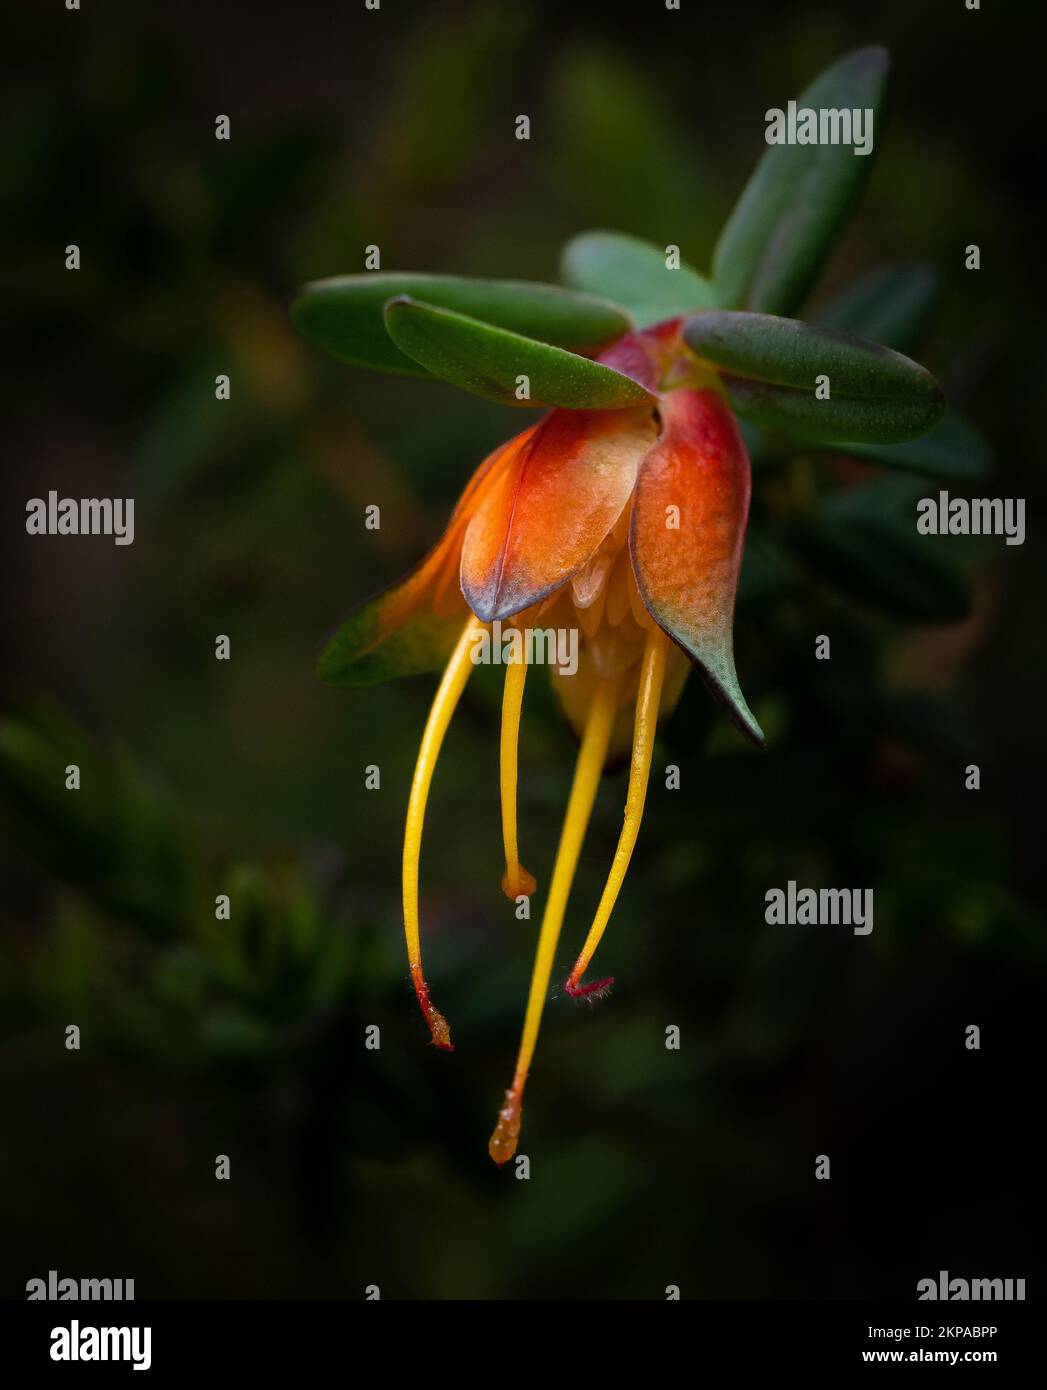 A closeup shot of a lemon-scented darwinia flower isolated on a blurred dark background Stock Photo